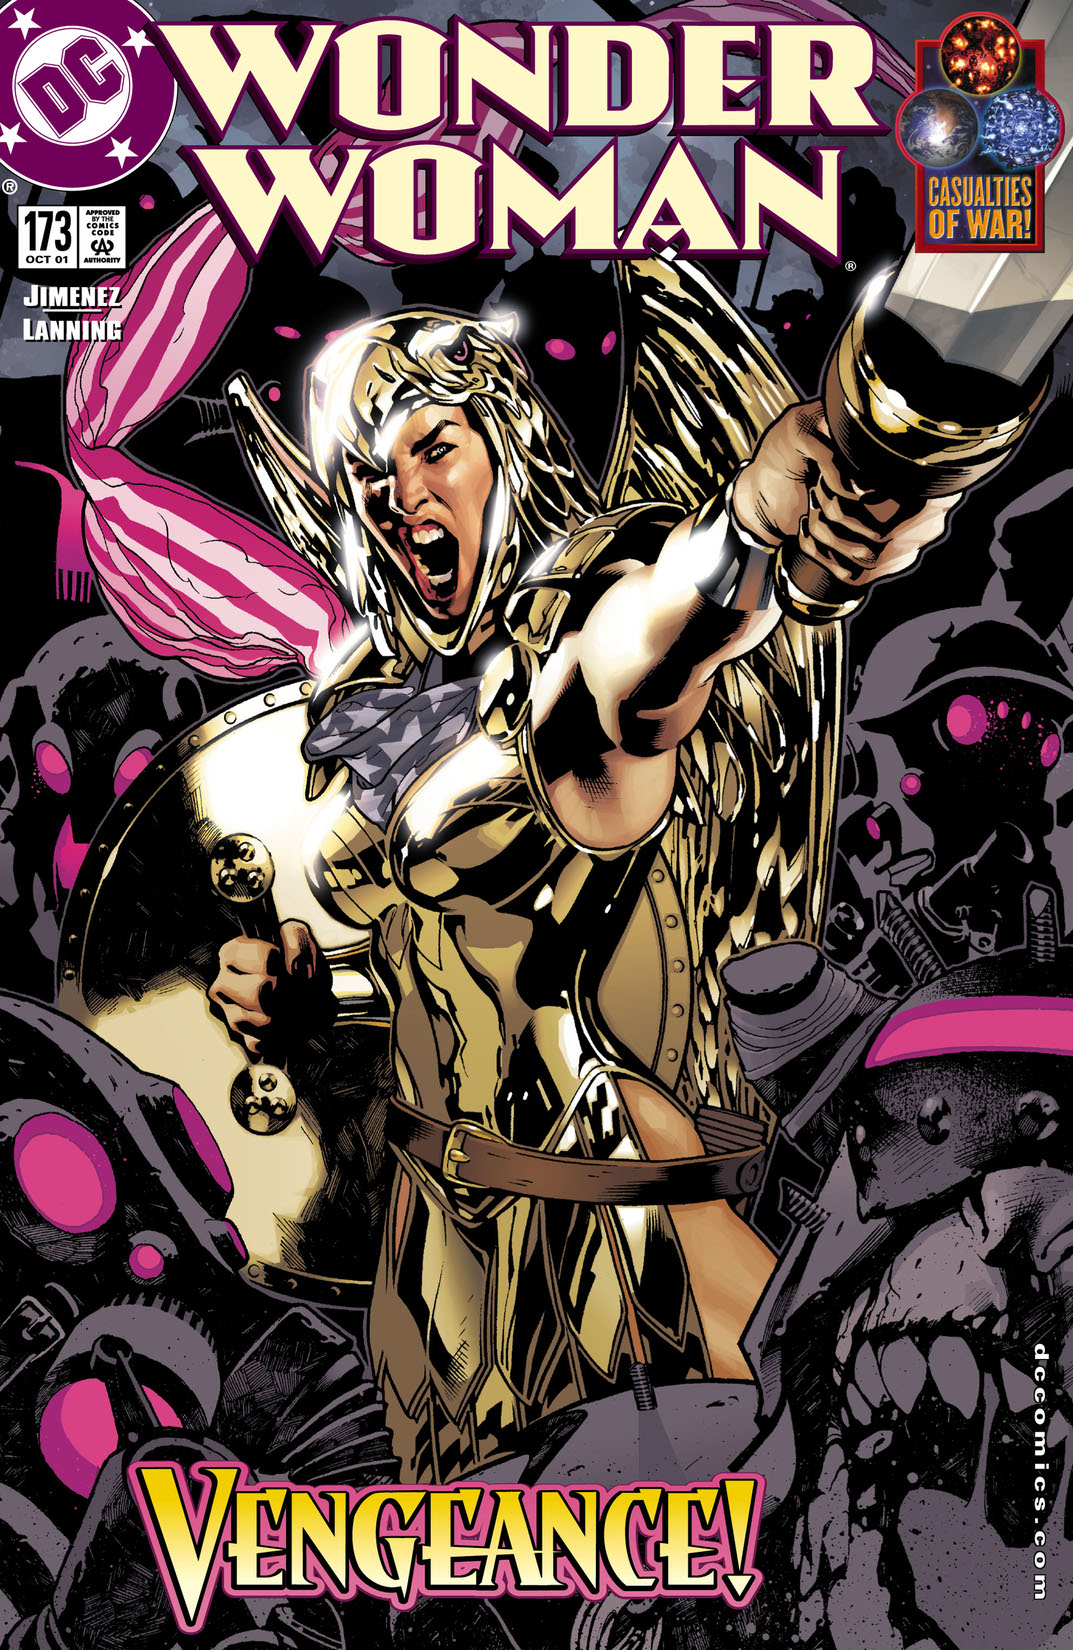 Wonder Woman (1986-) #173 preview images